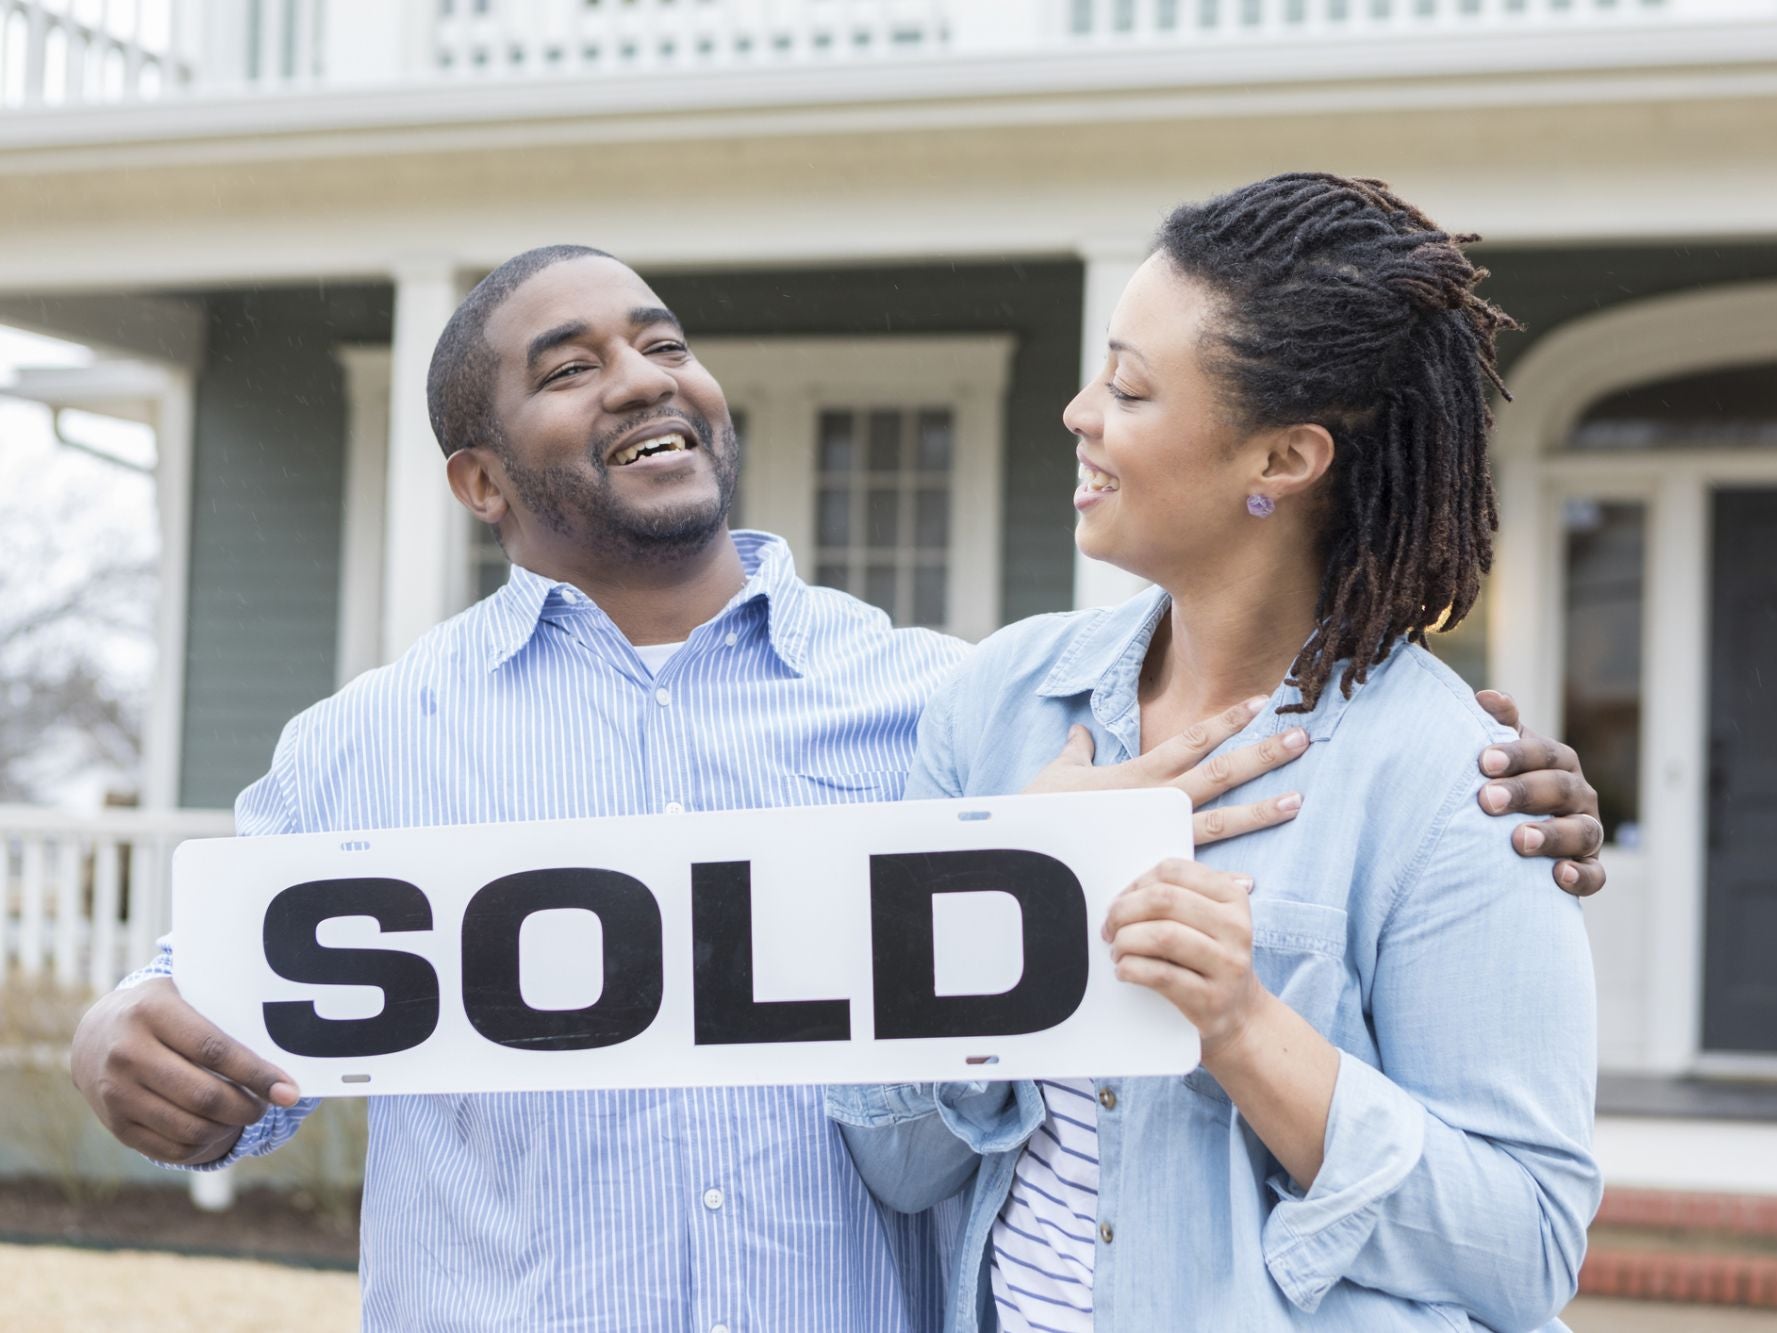 The Top Strategies for Selling Your Home Quickly